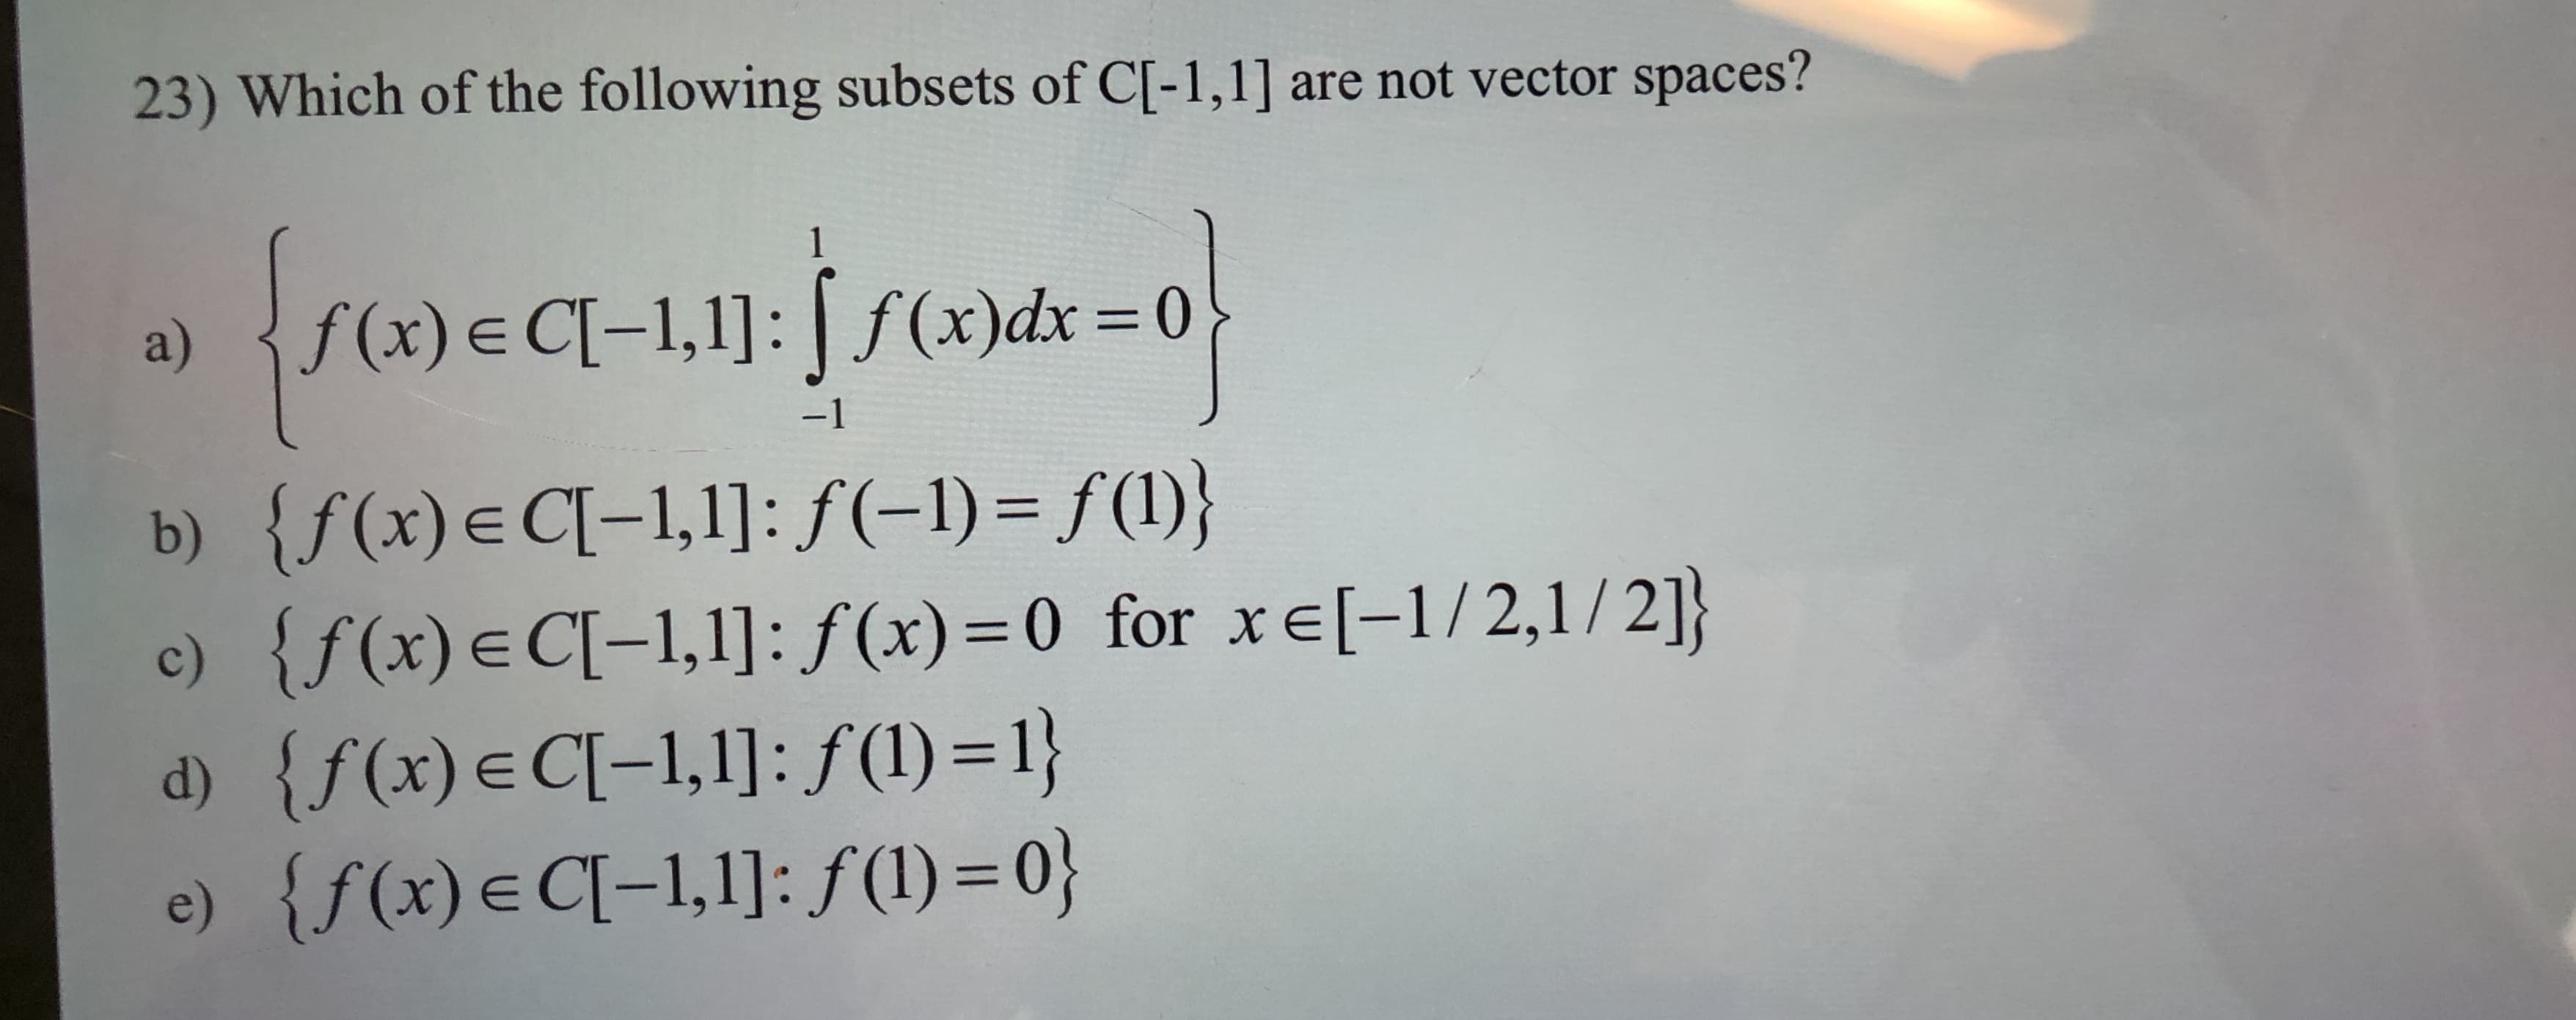 are not vector spaces?
23) Which of the following subsets of C[-1,1]
1
(x)dx 0
f(x) E CI-1,1]:
a)
-1
{f(x)e C-1,1]: f(-1) = f(l)}
{f (x) E C[-1,1]: f(x) 0 for xe[-1/2,1 / 2]}
{f(x) e Cl-1,1]: f (1) = 1}
e) {f(x)e CI-1,1]: f(l) = 0}
b)
c)
d)
